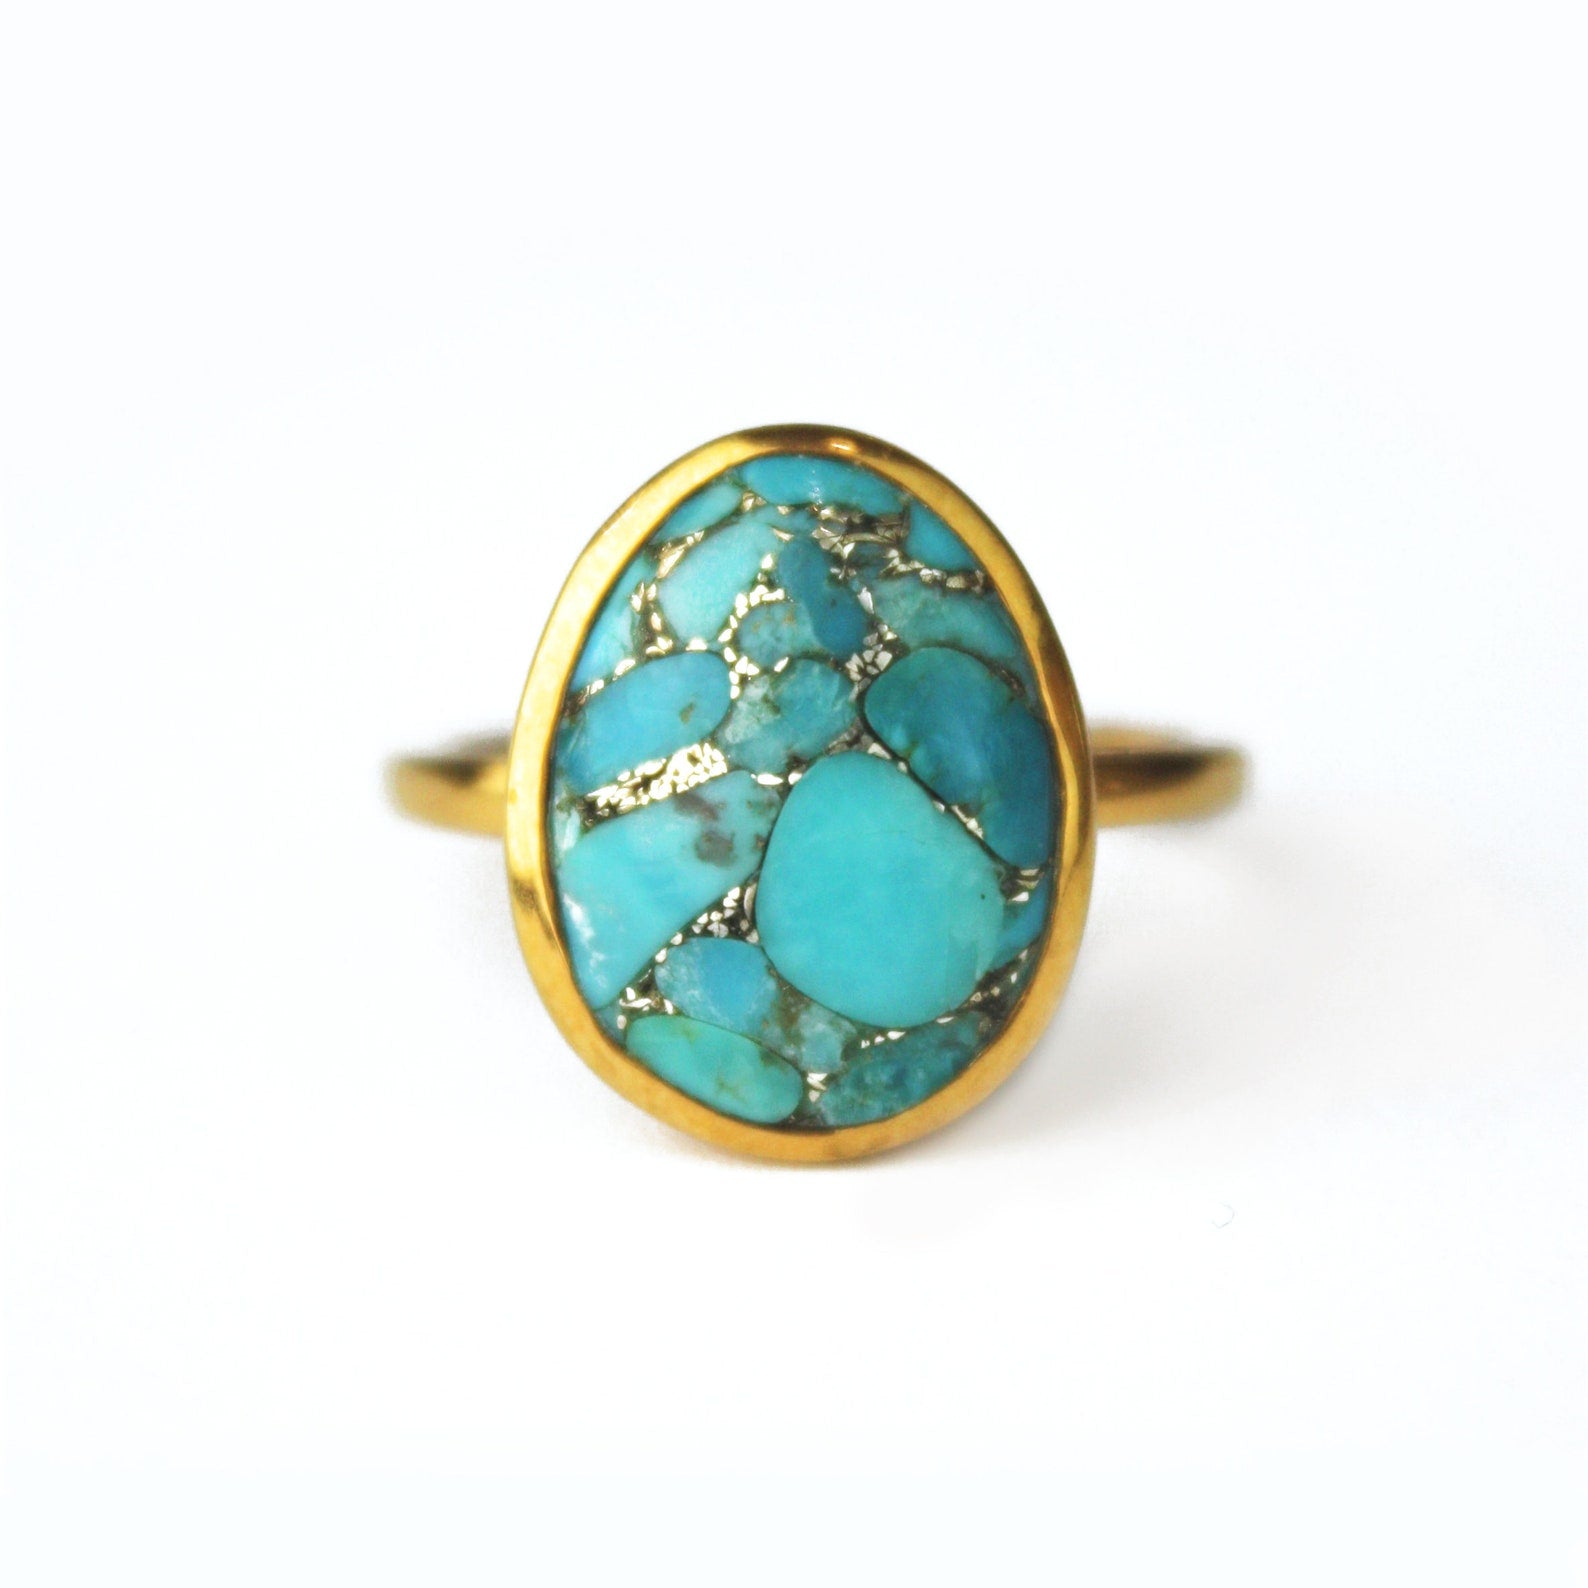 Women's .925 Sterling Silver Fancy Oval Simulated Turquoise Ring